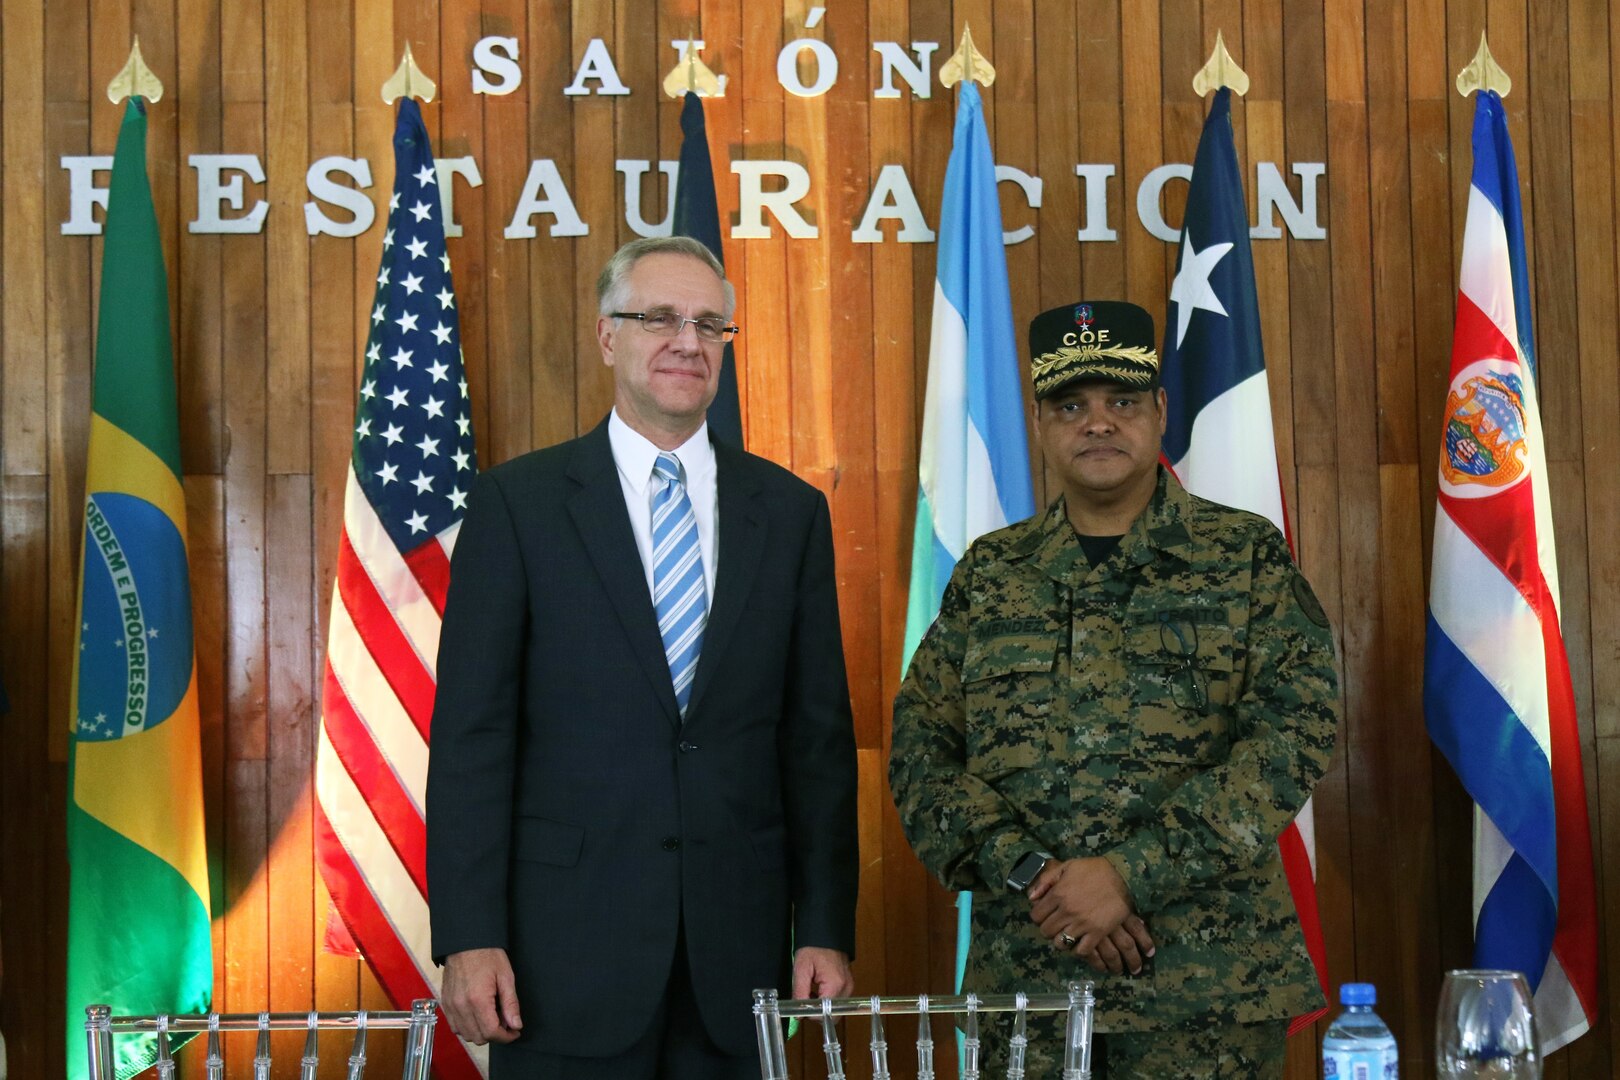 Robert E. Copley (left), Deputy Chief of Mission at the U.S. Embassy in Santo Domingo, Dominican Republic, poses alongside Brig. Gen. Juan Manuel Mendez Garcia, director of the Emergency Operations Center for the Dominican Republic, at the opening ceremony of Fuerzas Aliadas Humanitarias in Santo Domingo May 6. FA-HUM 19 is a U.S. Army South-sponsored foreign humanitarian assistance and disaster relief exercise designed to build U.S. partner nation’s capacity for civil and military response to major disasters. More than 100 national experts from 13 Latin American countries operated jointly throughout FA-HUM 19 simulations and training events from May 6-17 in the Dominican Republic.